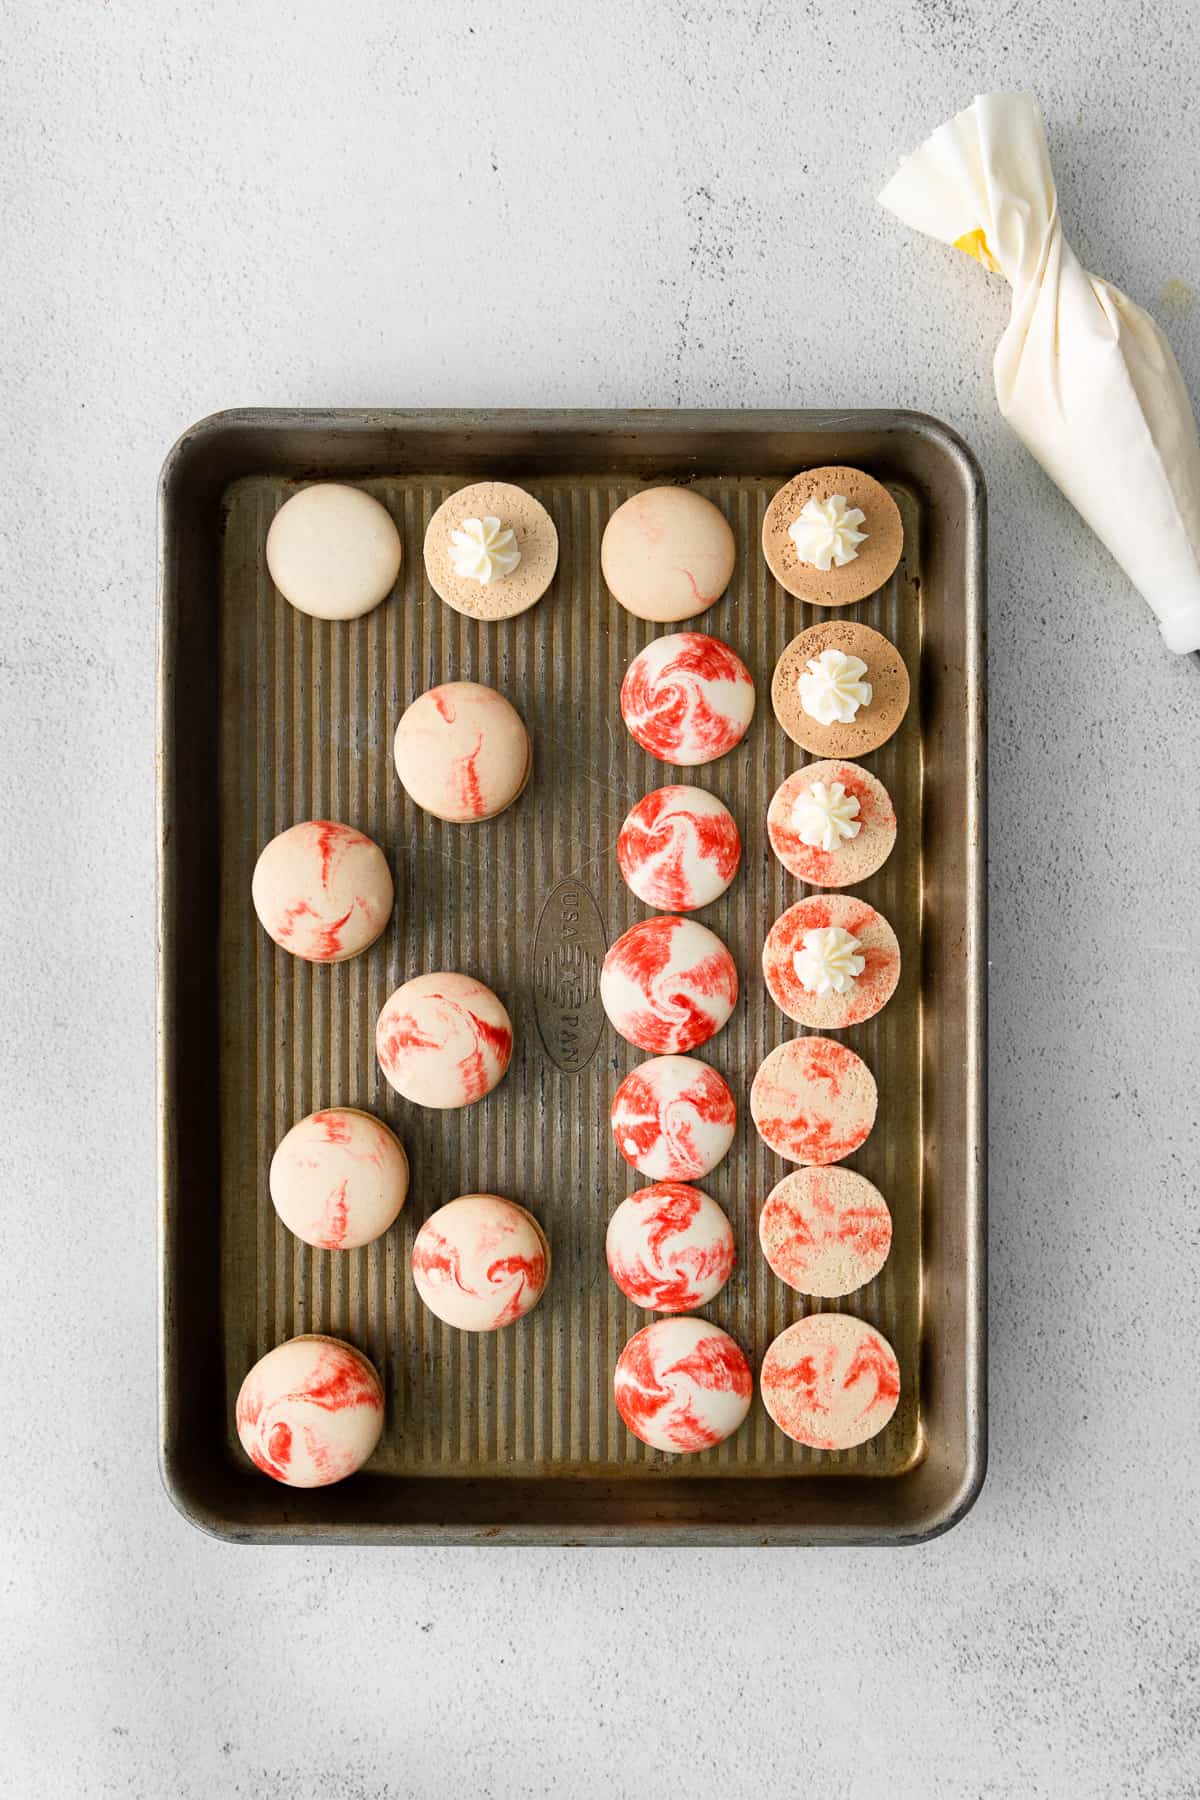 Piping peppermint buttercream onto red and white swirled macaron shells.